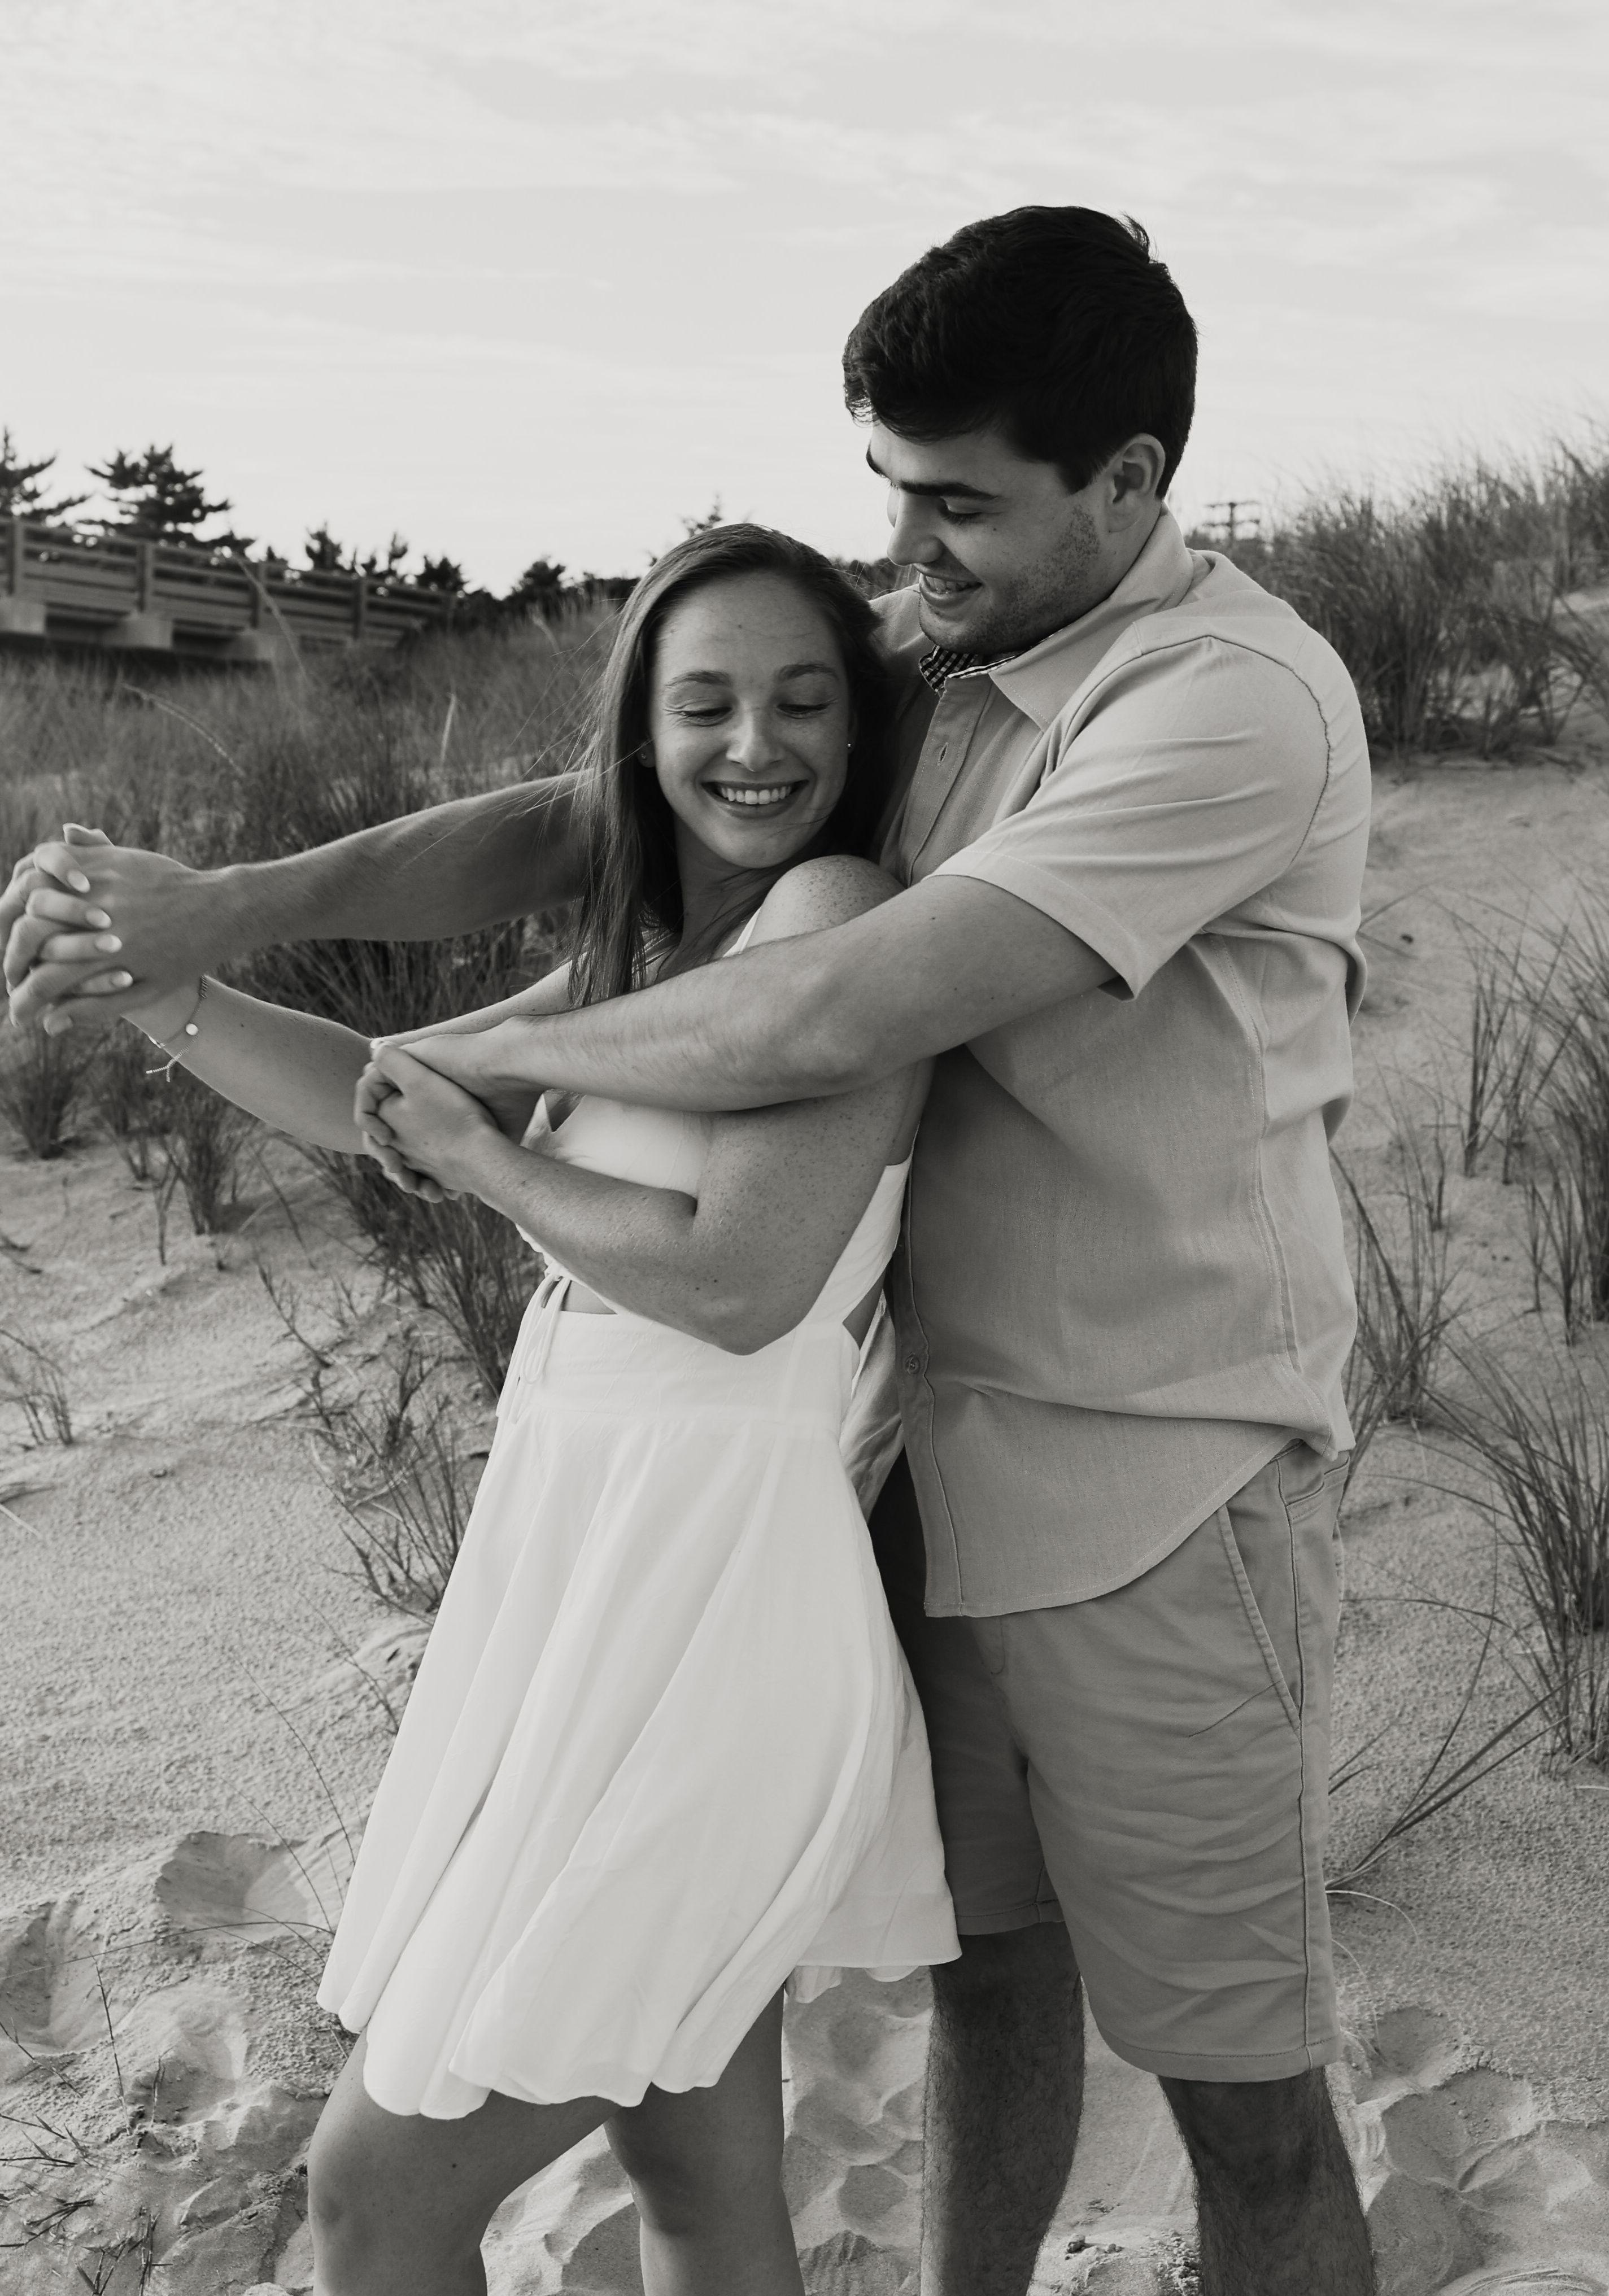 The Wedding Website of Bailey Ayme and Patrick McGinley